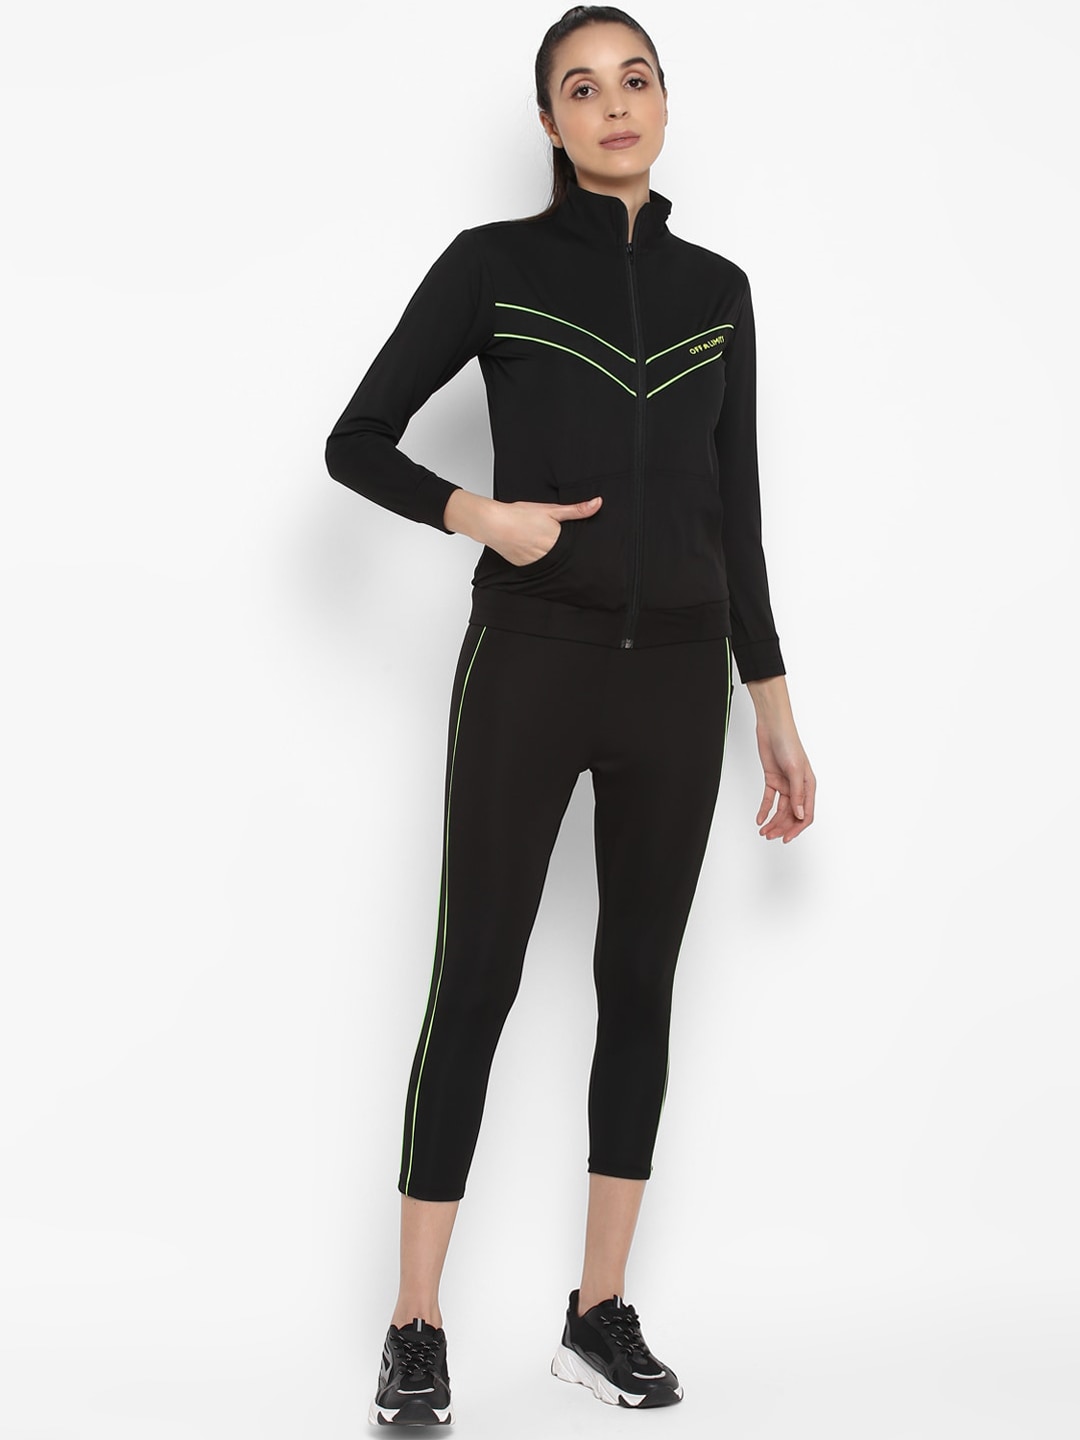 OFF LIMITS Women Black & Green Solid Track Suit Price in India